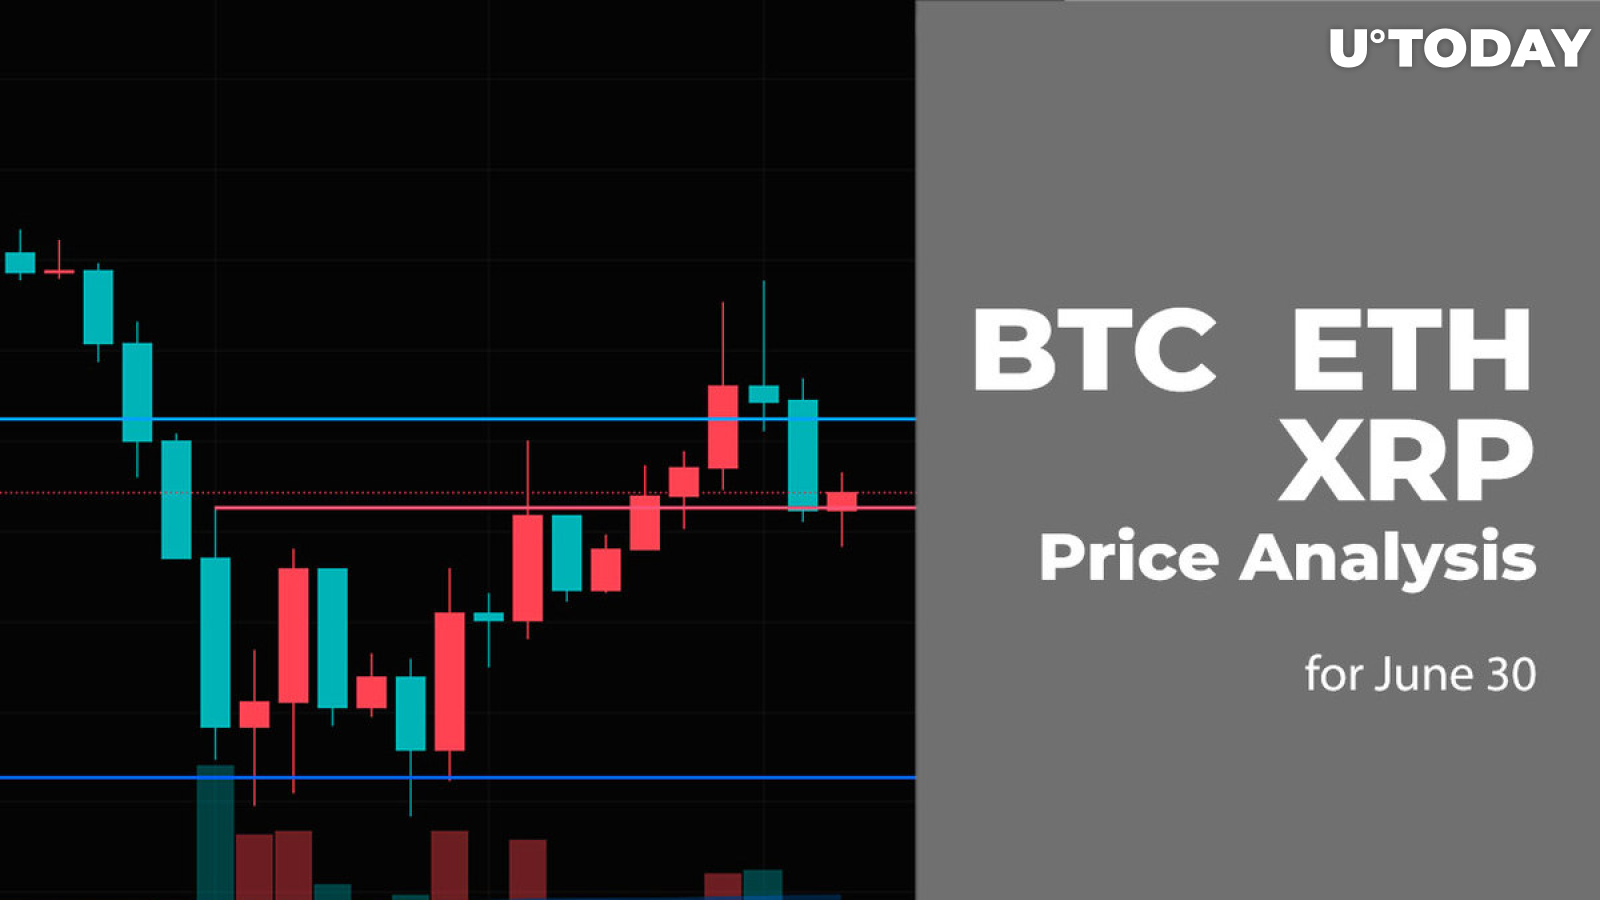 BTC, ETH and XRP Price Analysis for June 30